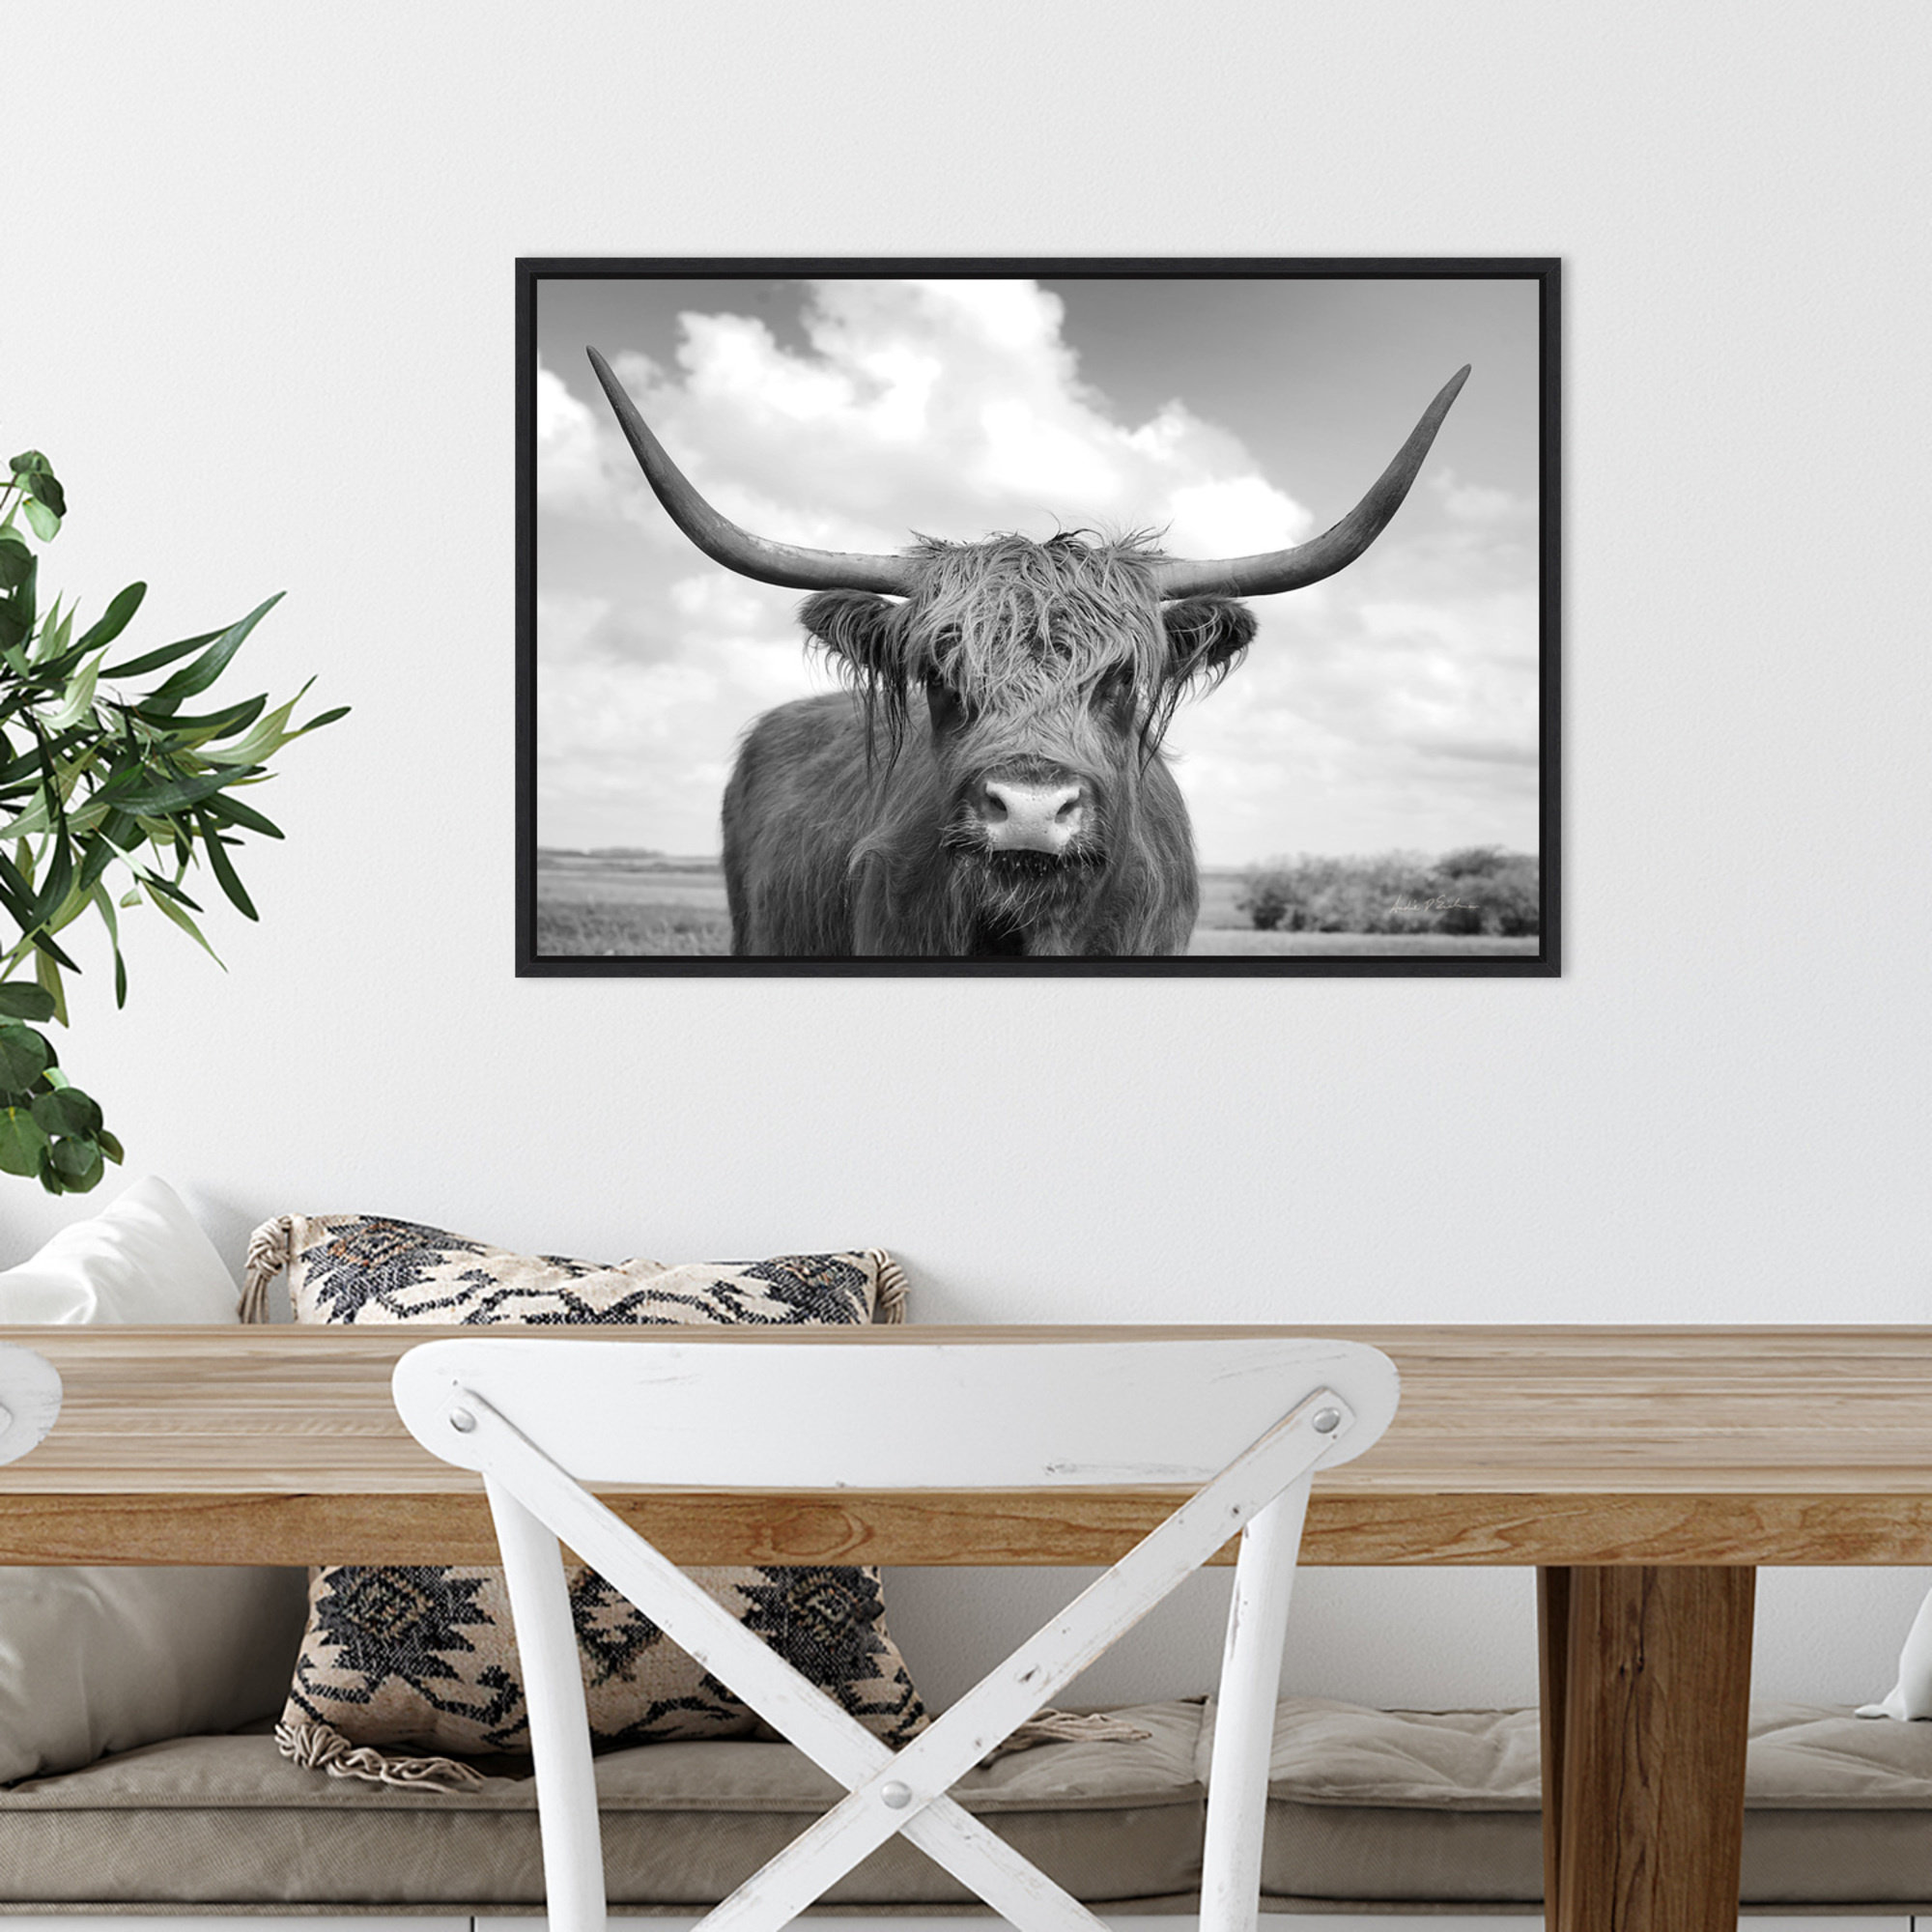 Union Rustic Andre Eichman Highland Cow On The Ranch Framed On Canvas 